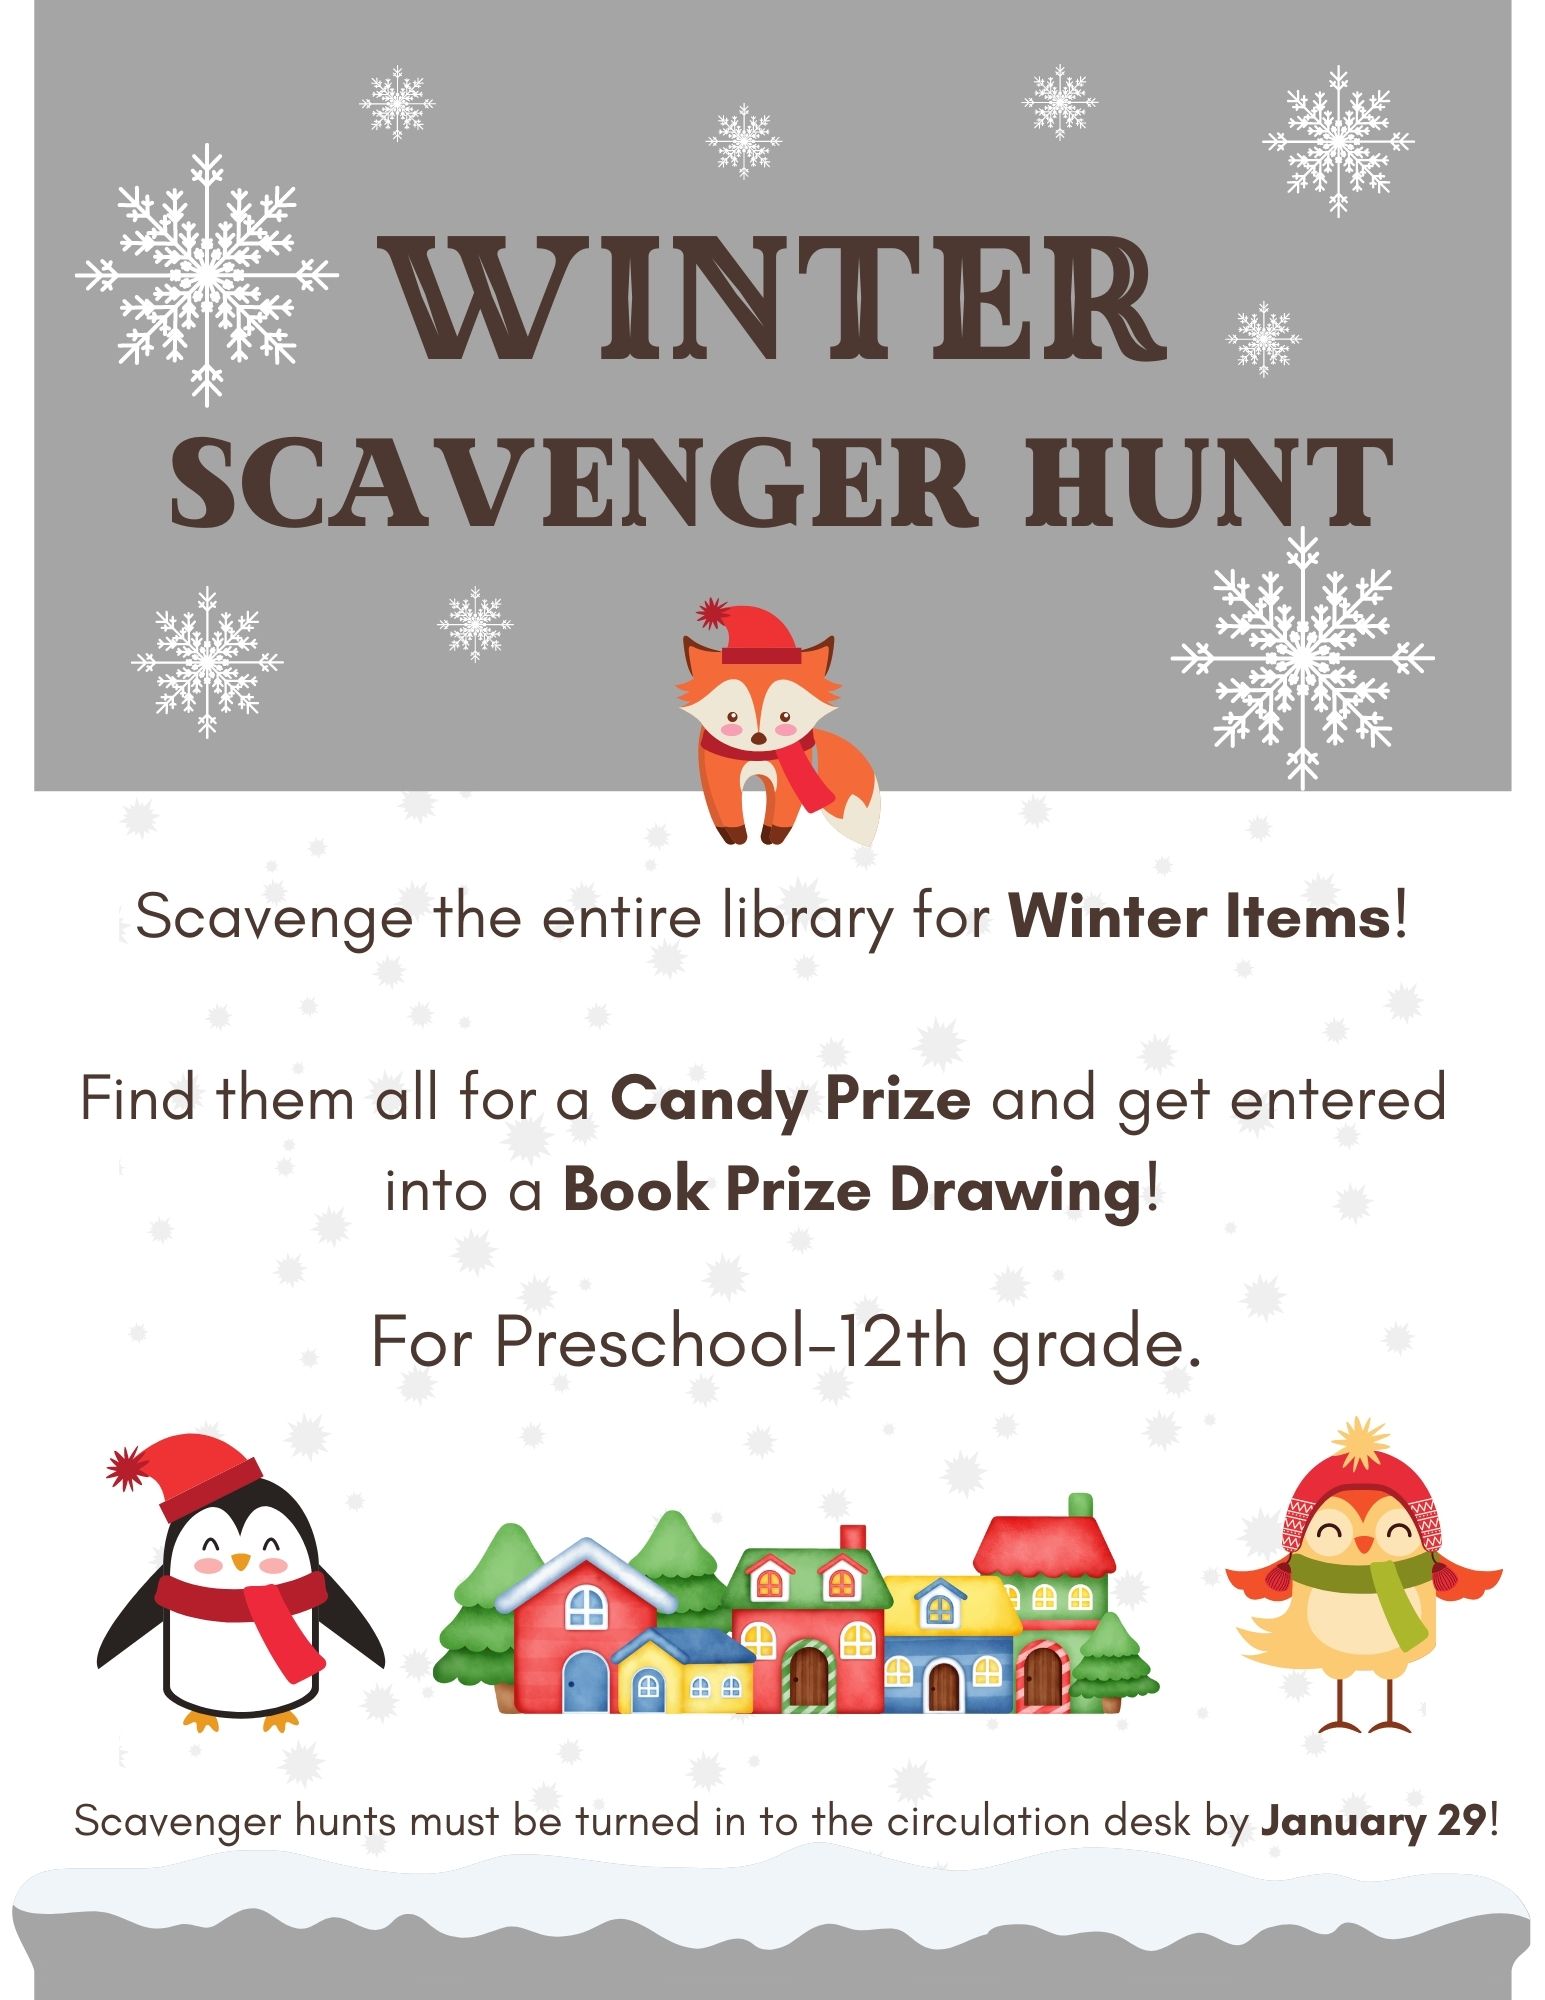 Winter Scavenger Hunt Scavenge the entire library for winter items. Find them all for a candy prize and get entered into our book prize drawing!  For preschool -12 Grade